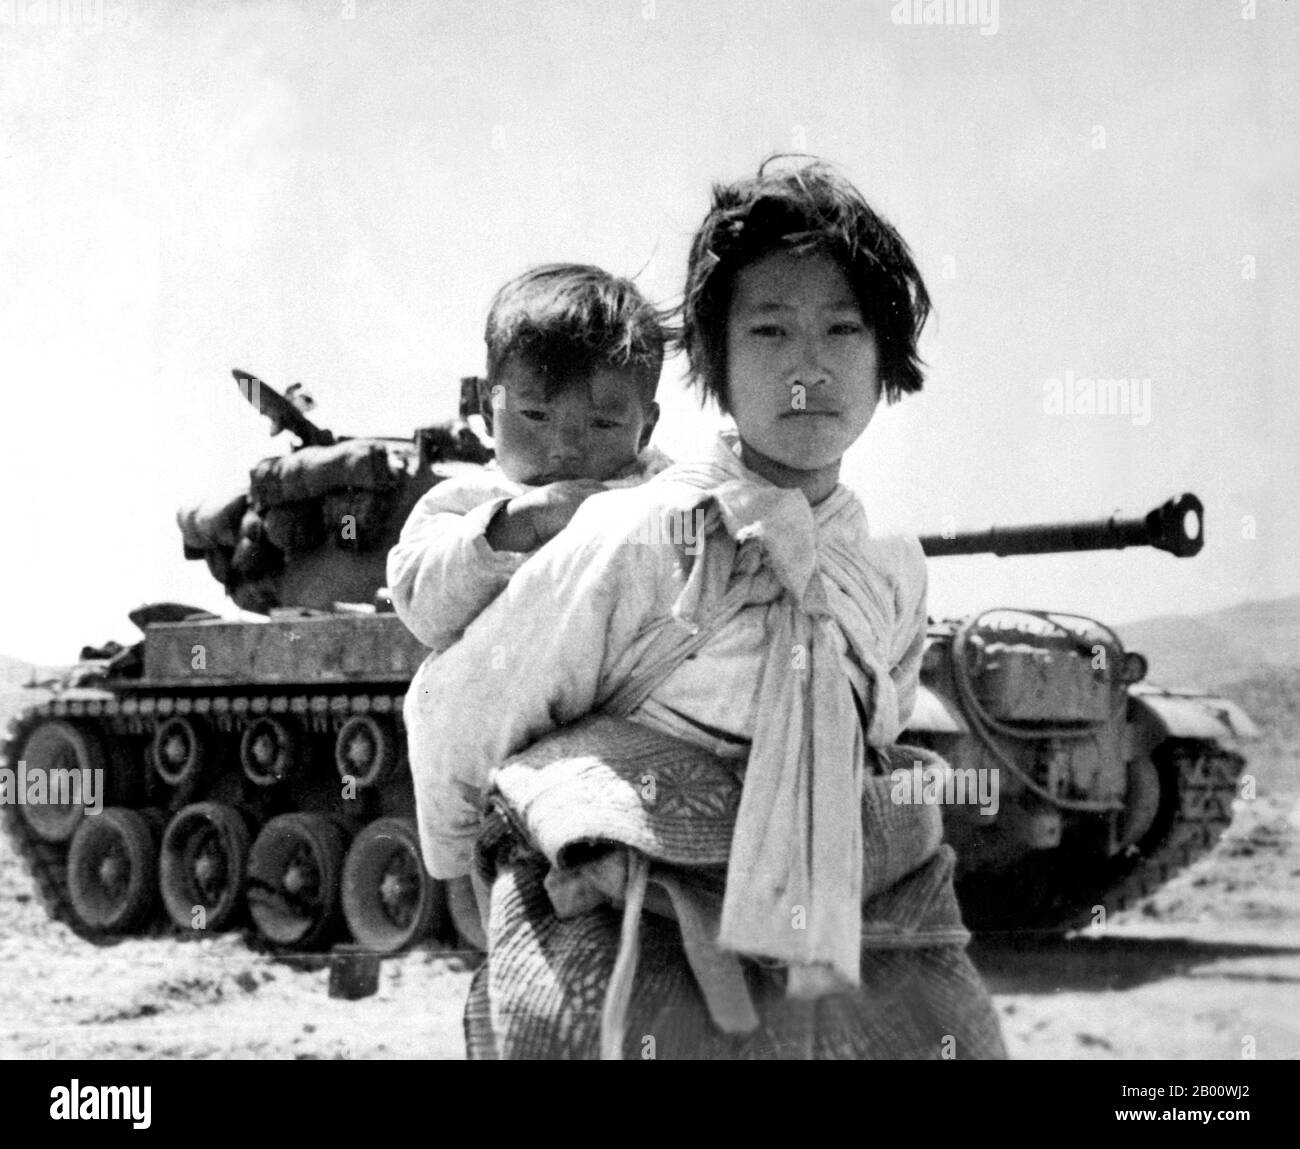 Korea: With her brother on her back a war-weary Korean girl  trudges by a stalled M-46 tank at Haengju, Korean War (1950-1953), 9 June 1951.  The Korean War (25 June 1950 - armistice signed 27 July 1953) was a military conflict between the Republic of Korea, supported by the United Nations, and North Korea, supported by the People's Republic of China (PRC), with military material aid from the Soviet Union. The war was a result of the physical division of Korea by an agreement of the victorious Allies at the conclusion of the Pacific War at the end of World War II. Stock Photo